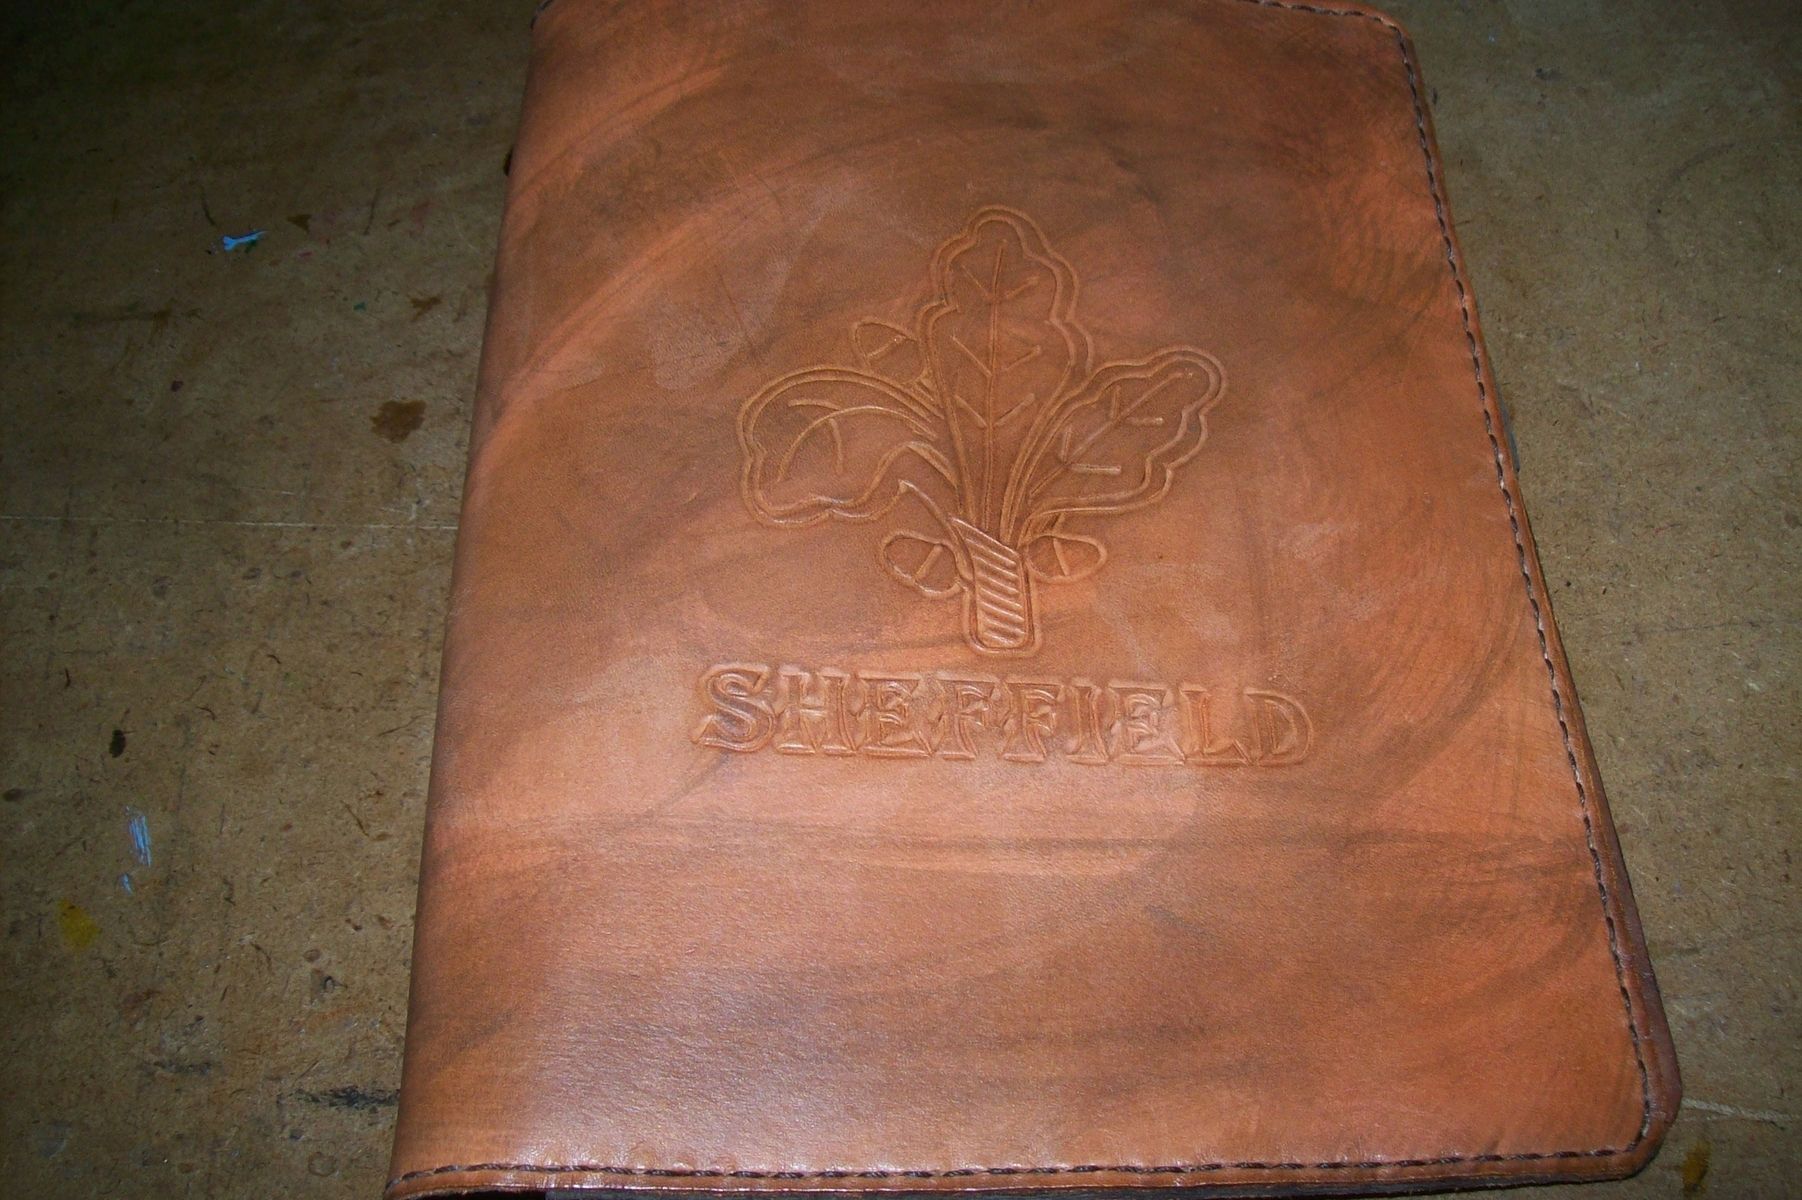 Buy Custom Made Premium Leather Day Planner For 7 Ring Franklin Covey  Classic, made to order from Kerry's Custom Leather